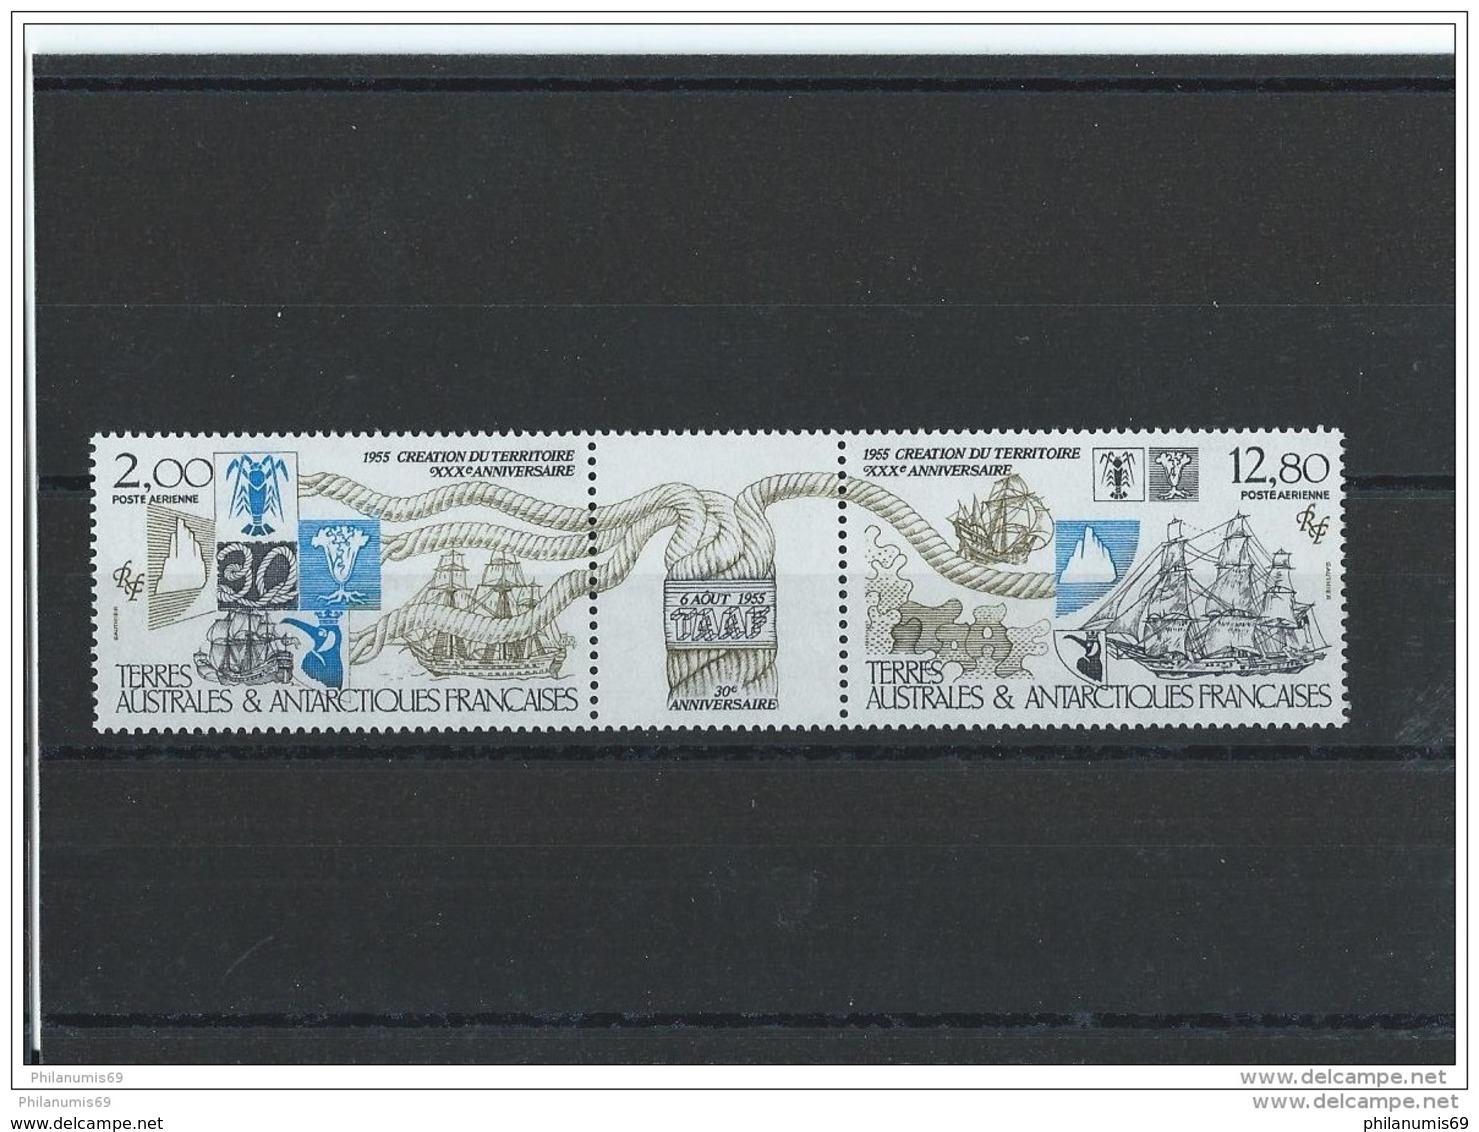 TAAF 1985 - YT PA N° 91A NEUF SANS CHARNIERE ** (MNH) GOMME D'ORIGINE LUXE - Poste Aérienne